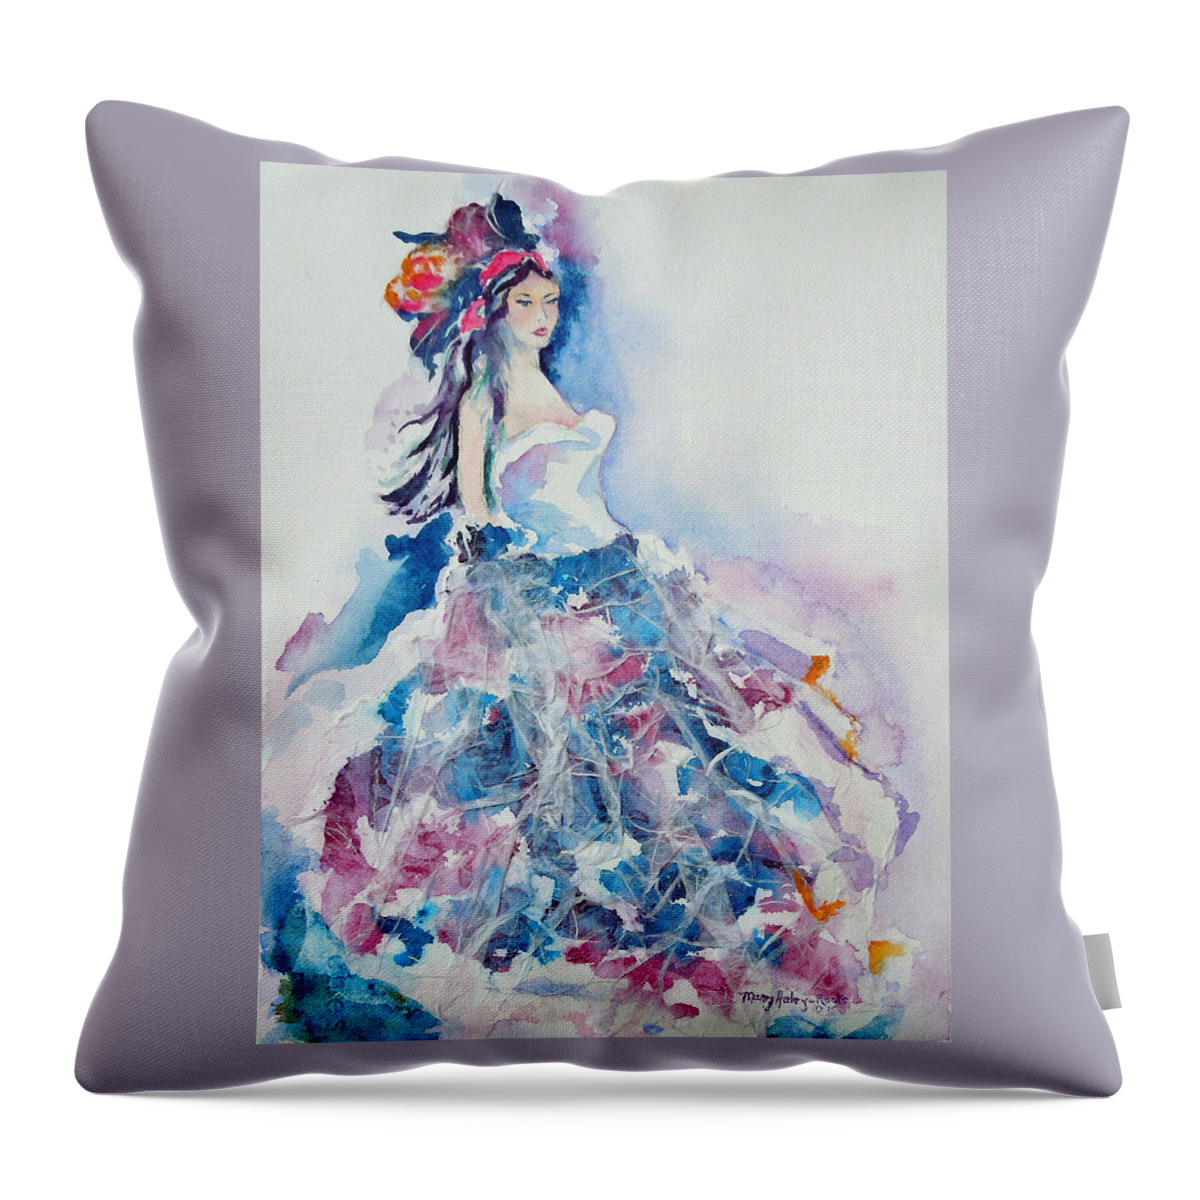 Watercolor Throw Pillow featuring the painting Fantasy Mist by Mary Haley-Rocks